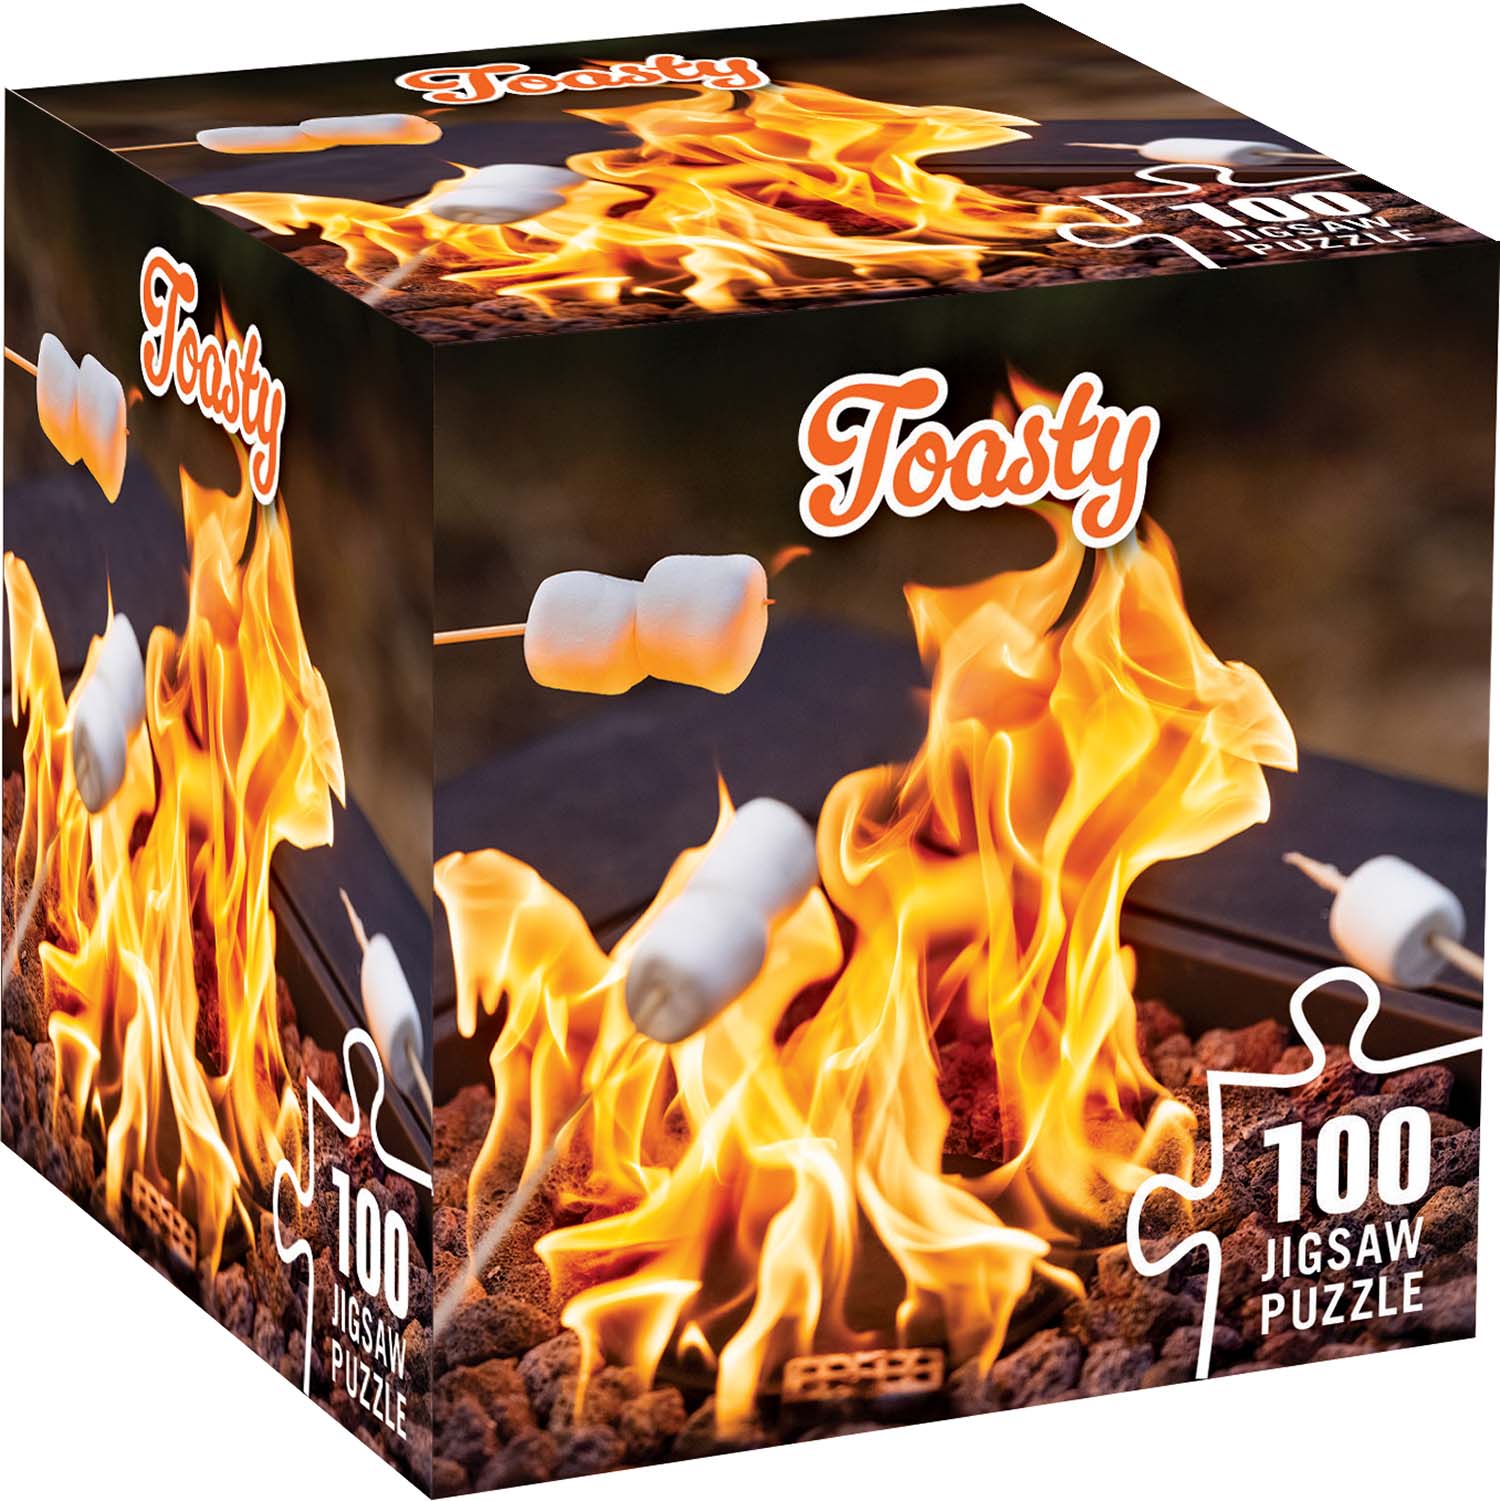 Toasty Dessert & Sweets Jigsaw Puzzle